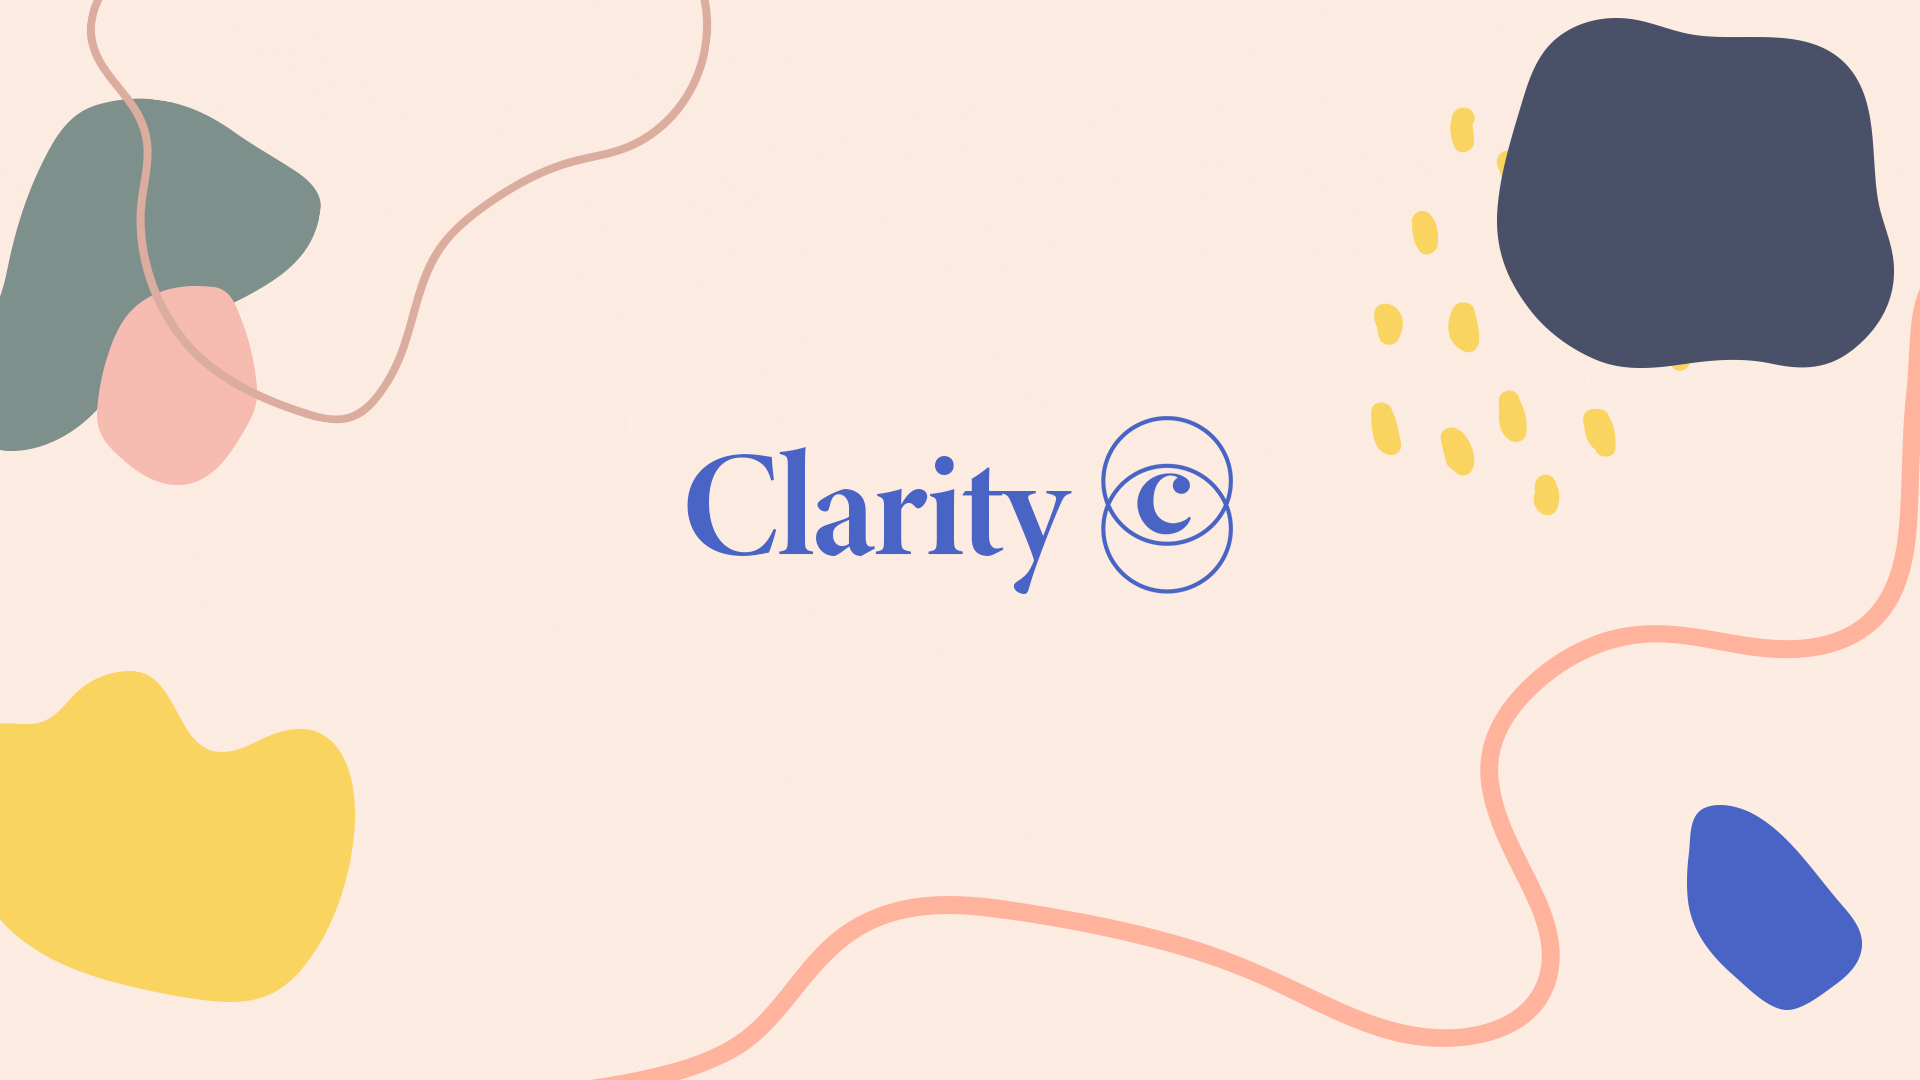 Clarity Squiggles 1920x1080